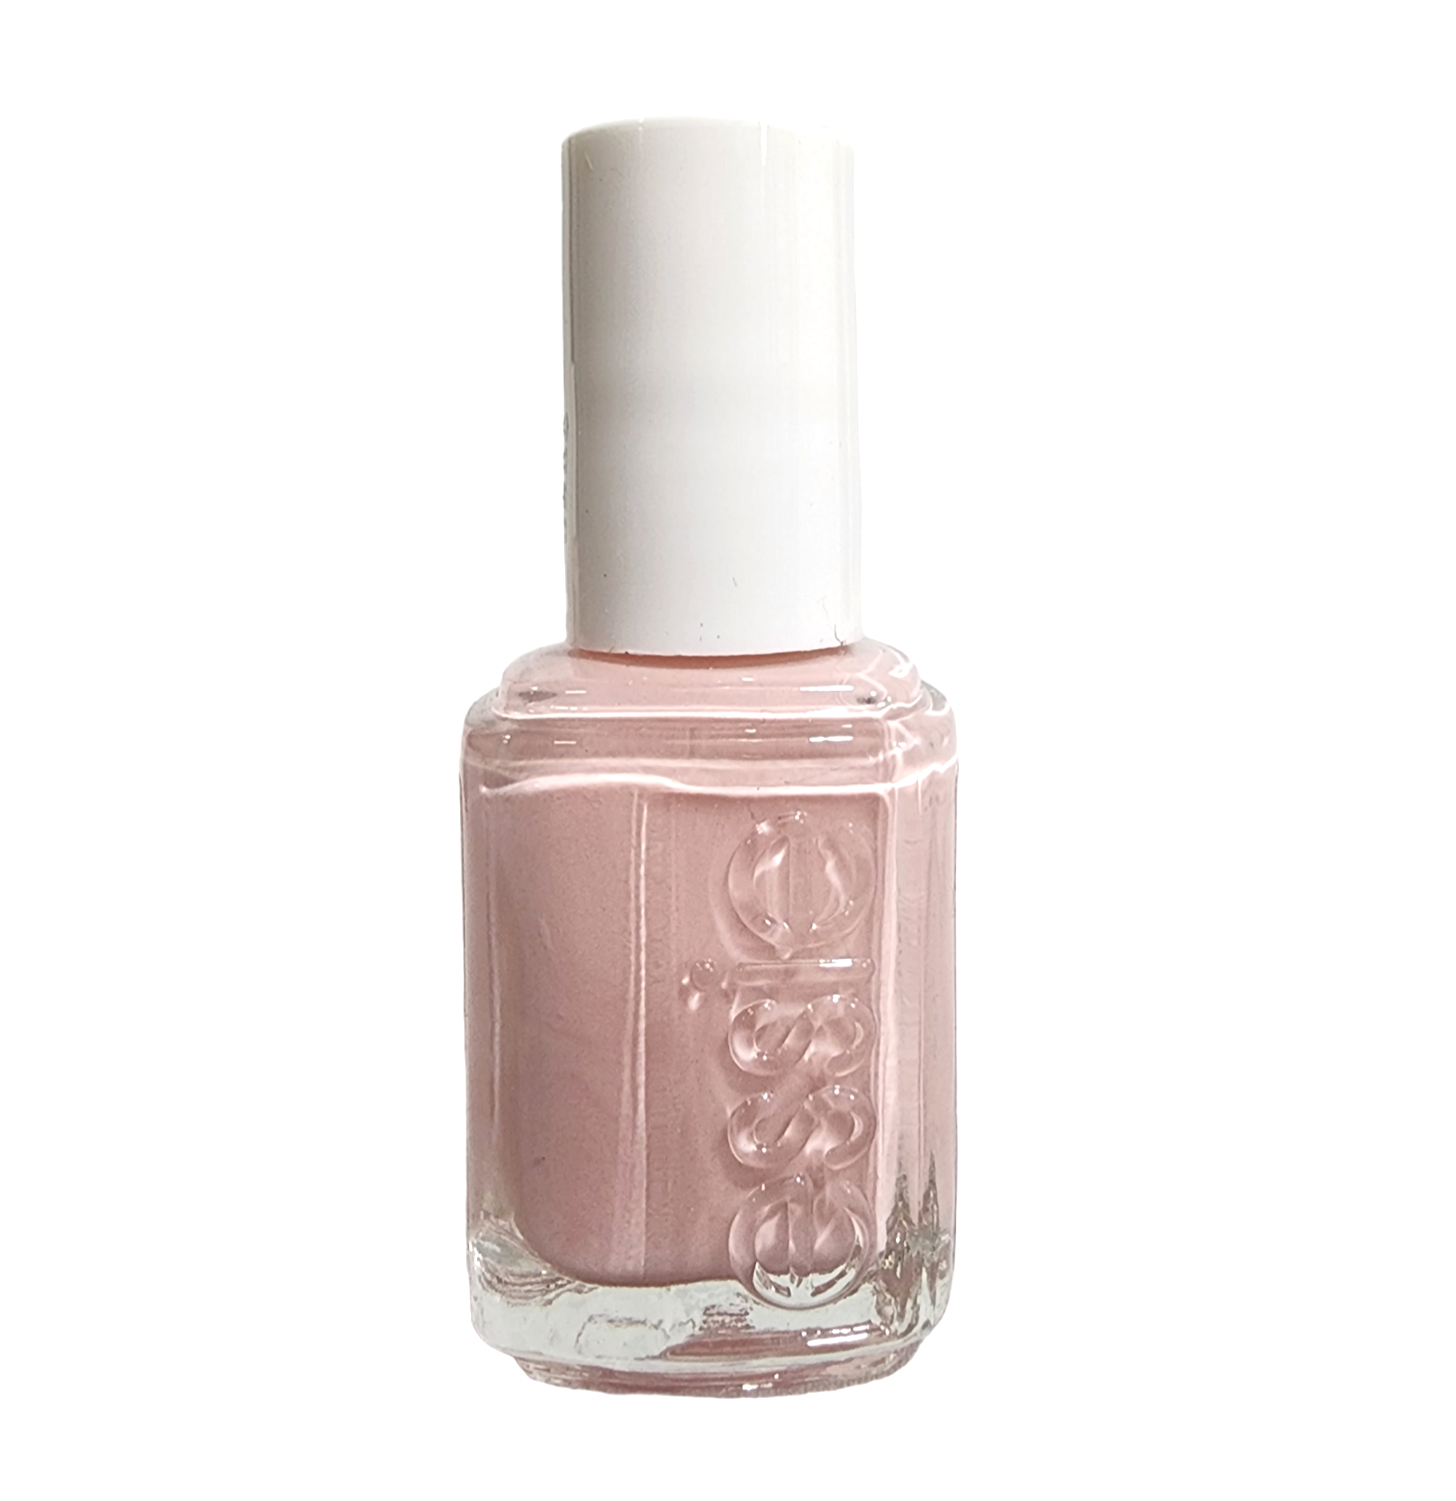 Essie Treat Love Color Strengthener Nail Polish Pink Pinked To Perfection 2 Pack essie 27 - фотография #2